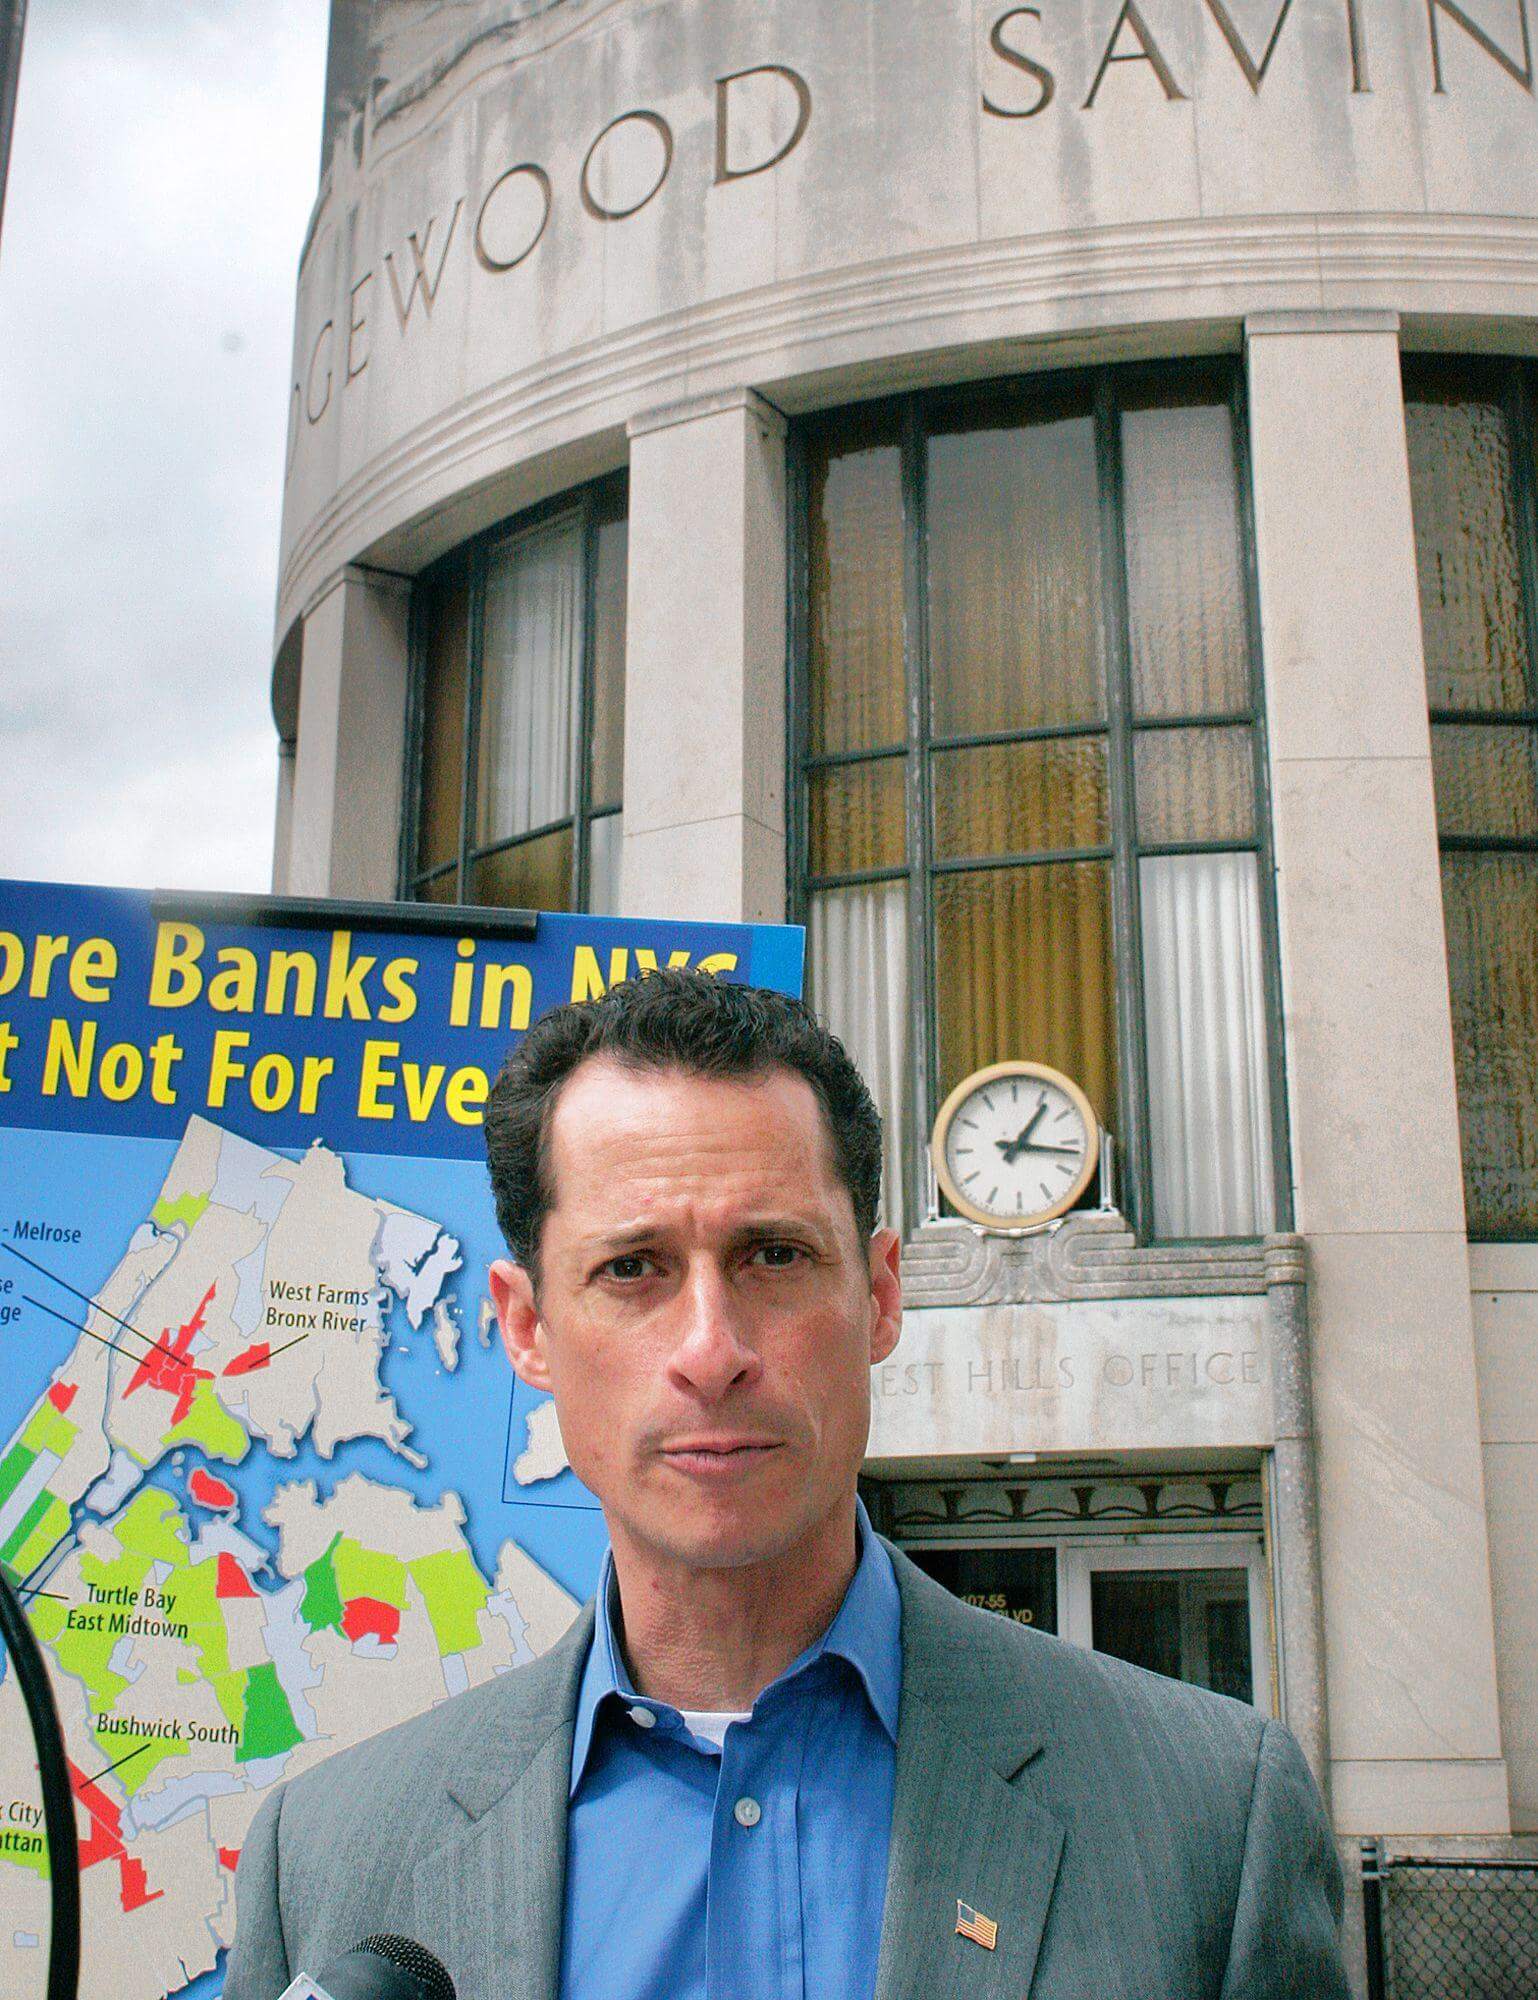 Weiner urges banks to branch out, help the poor